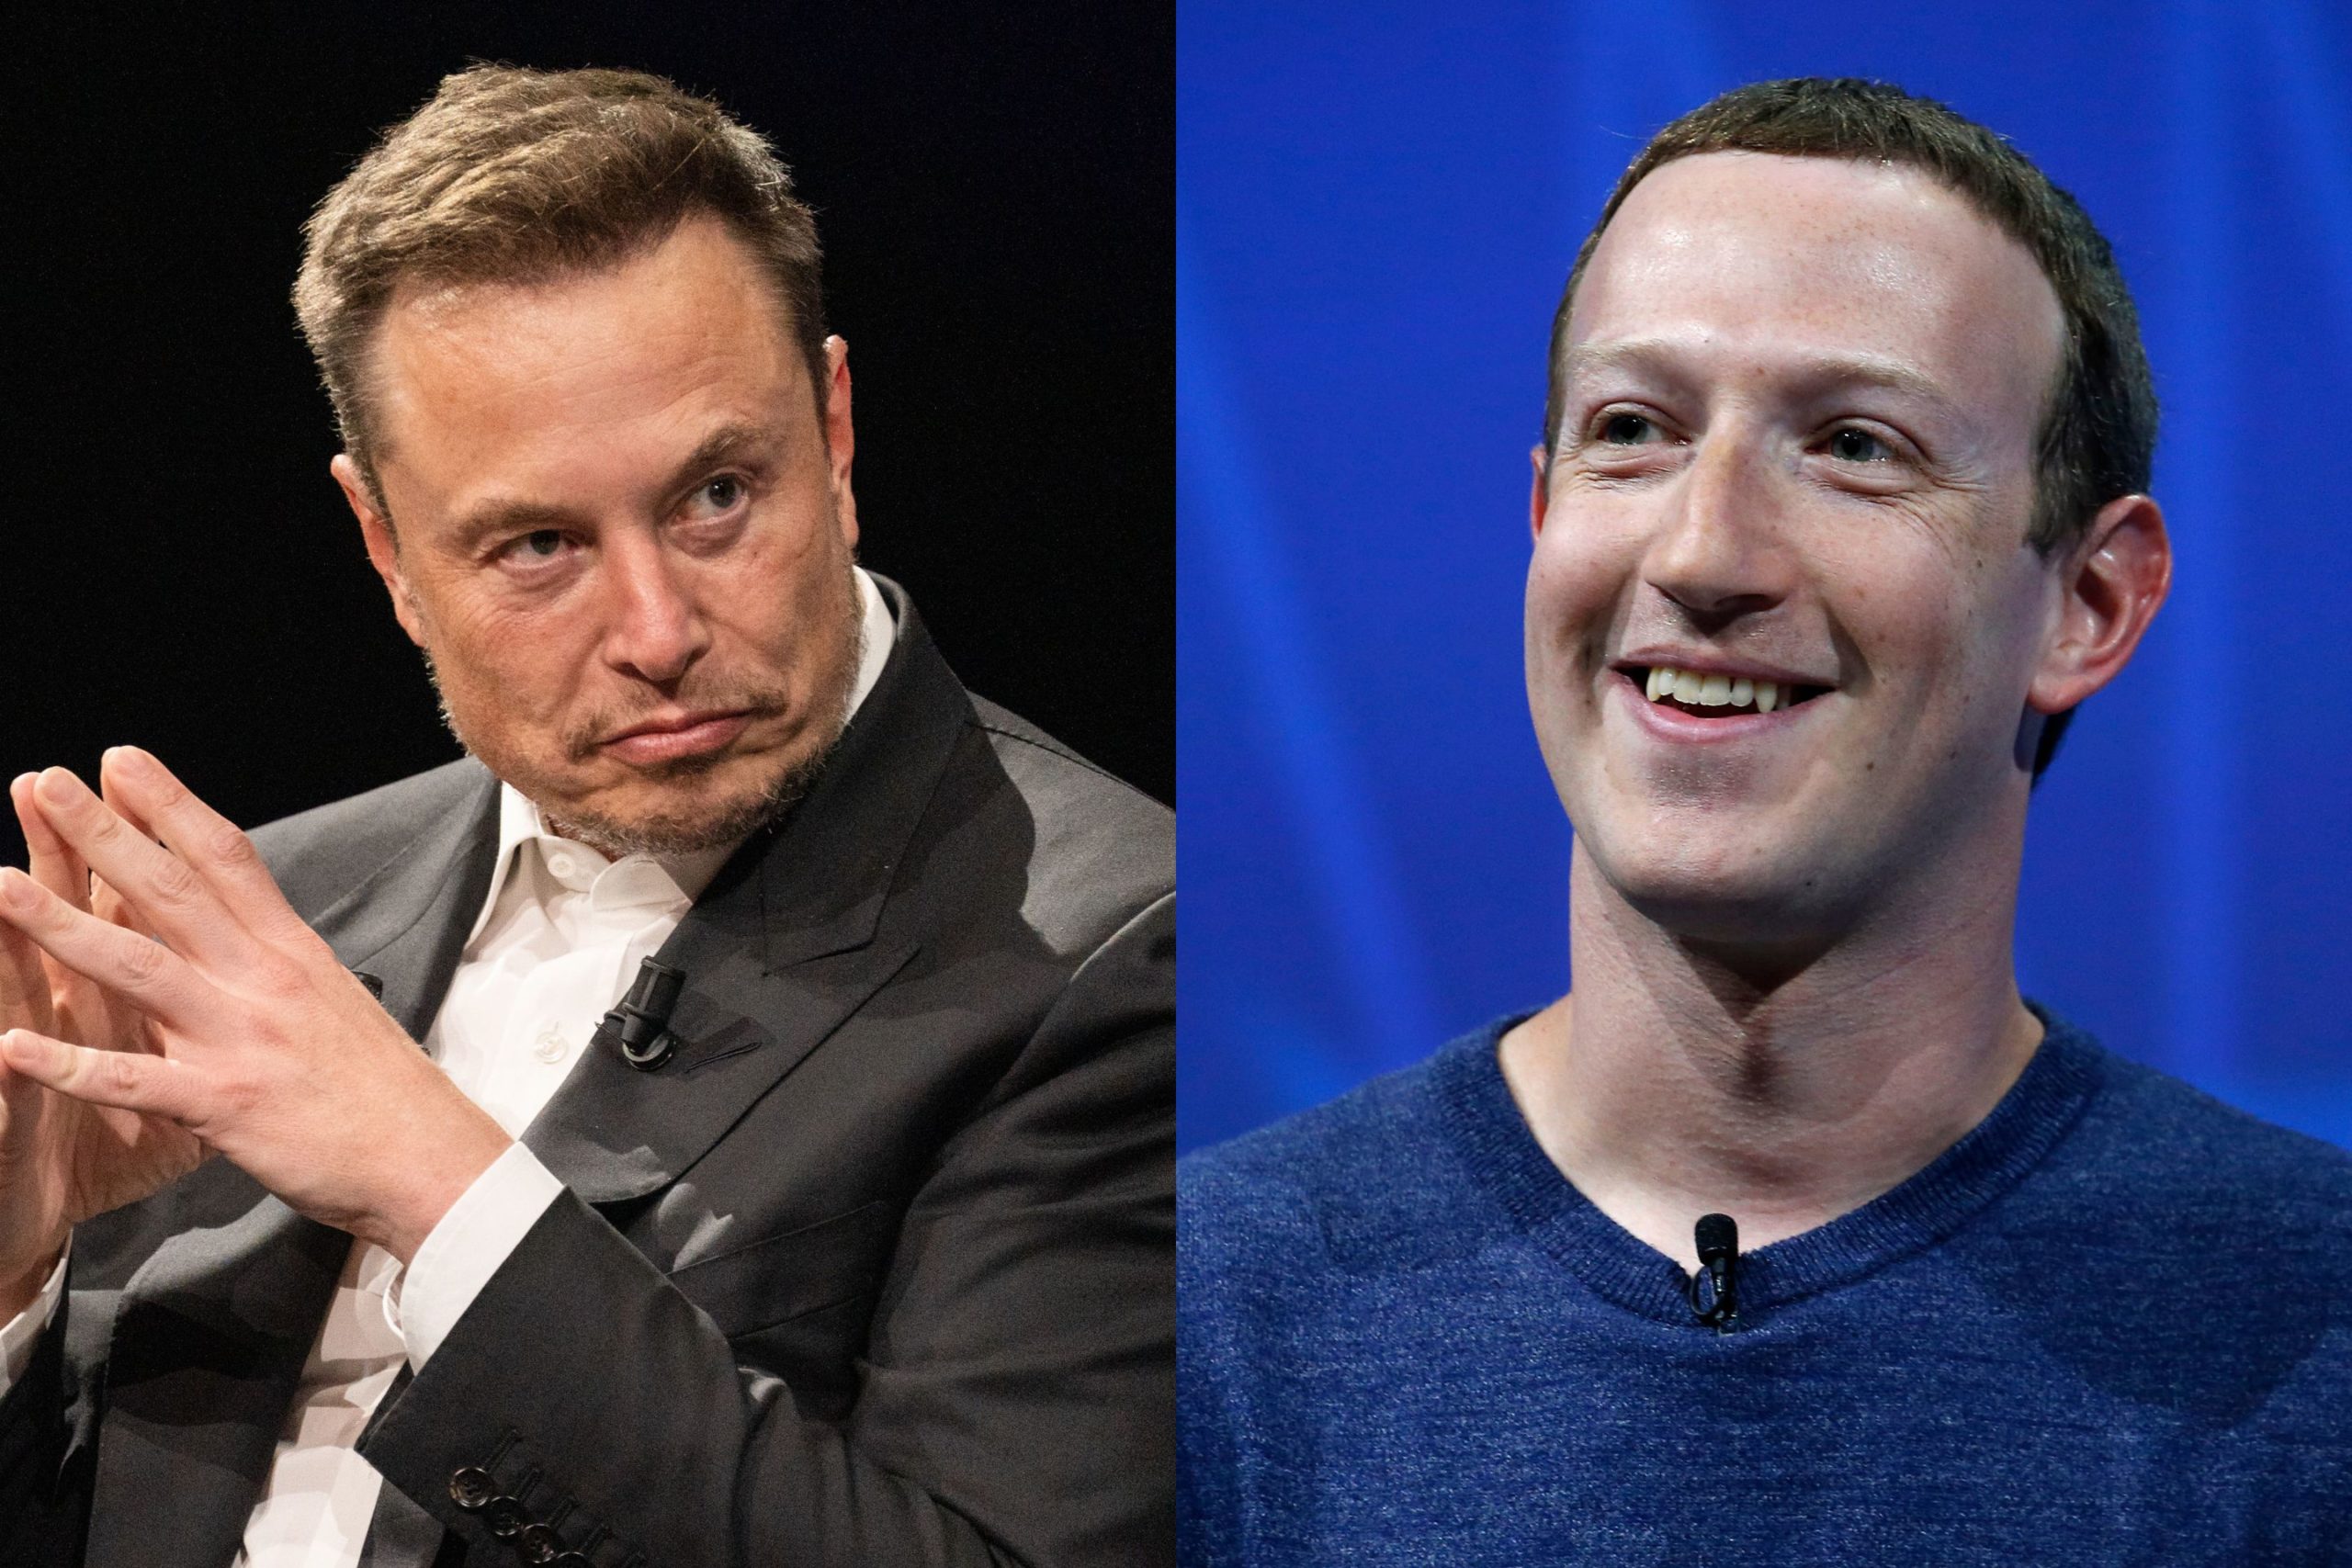 Elon Musk Says Mark Zuckerberg Fight Will Take Place in Rome, But He Needs ‘Minor Surgery’ First